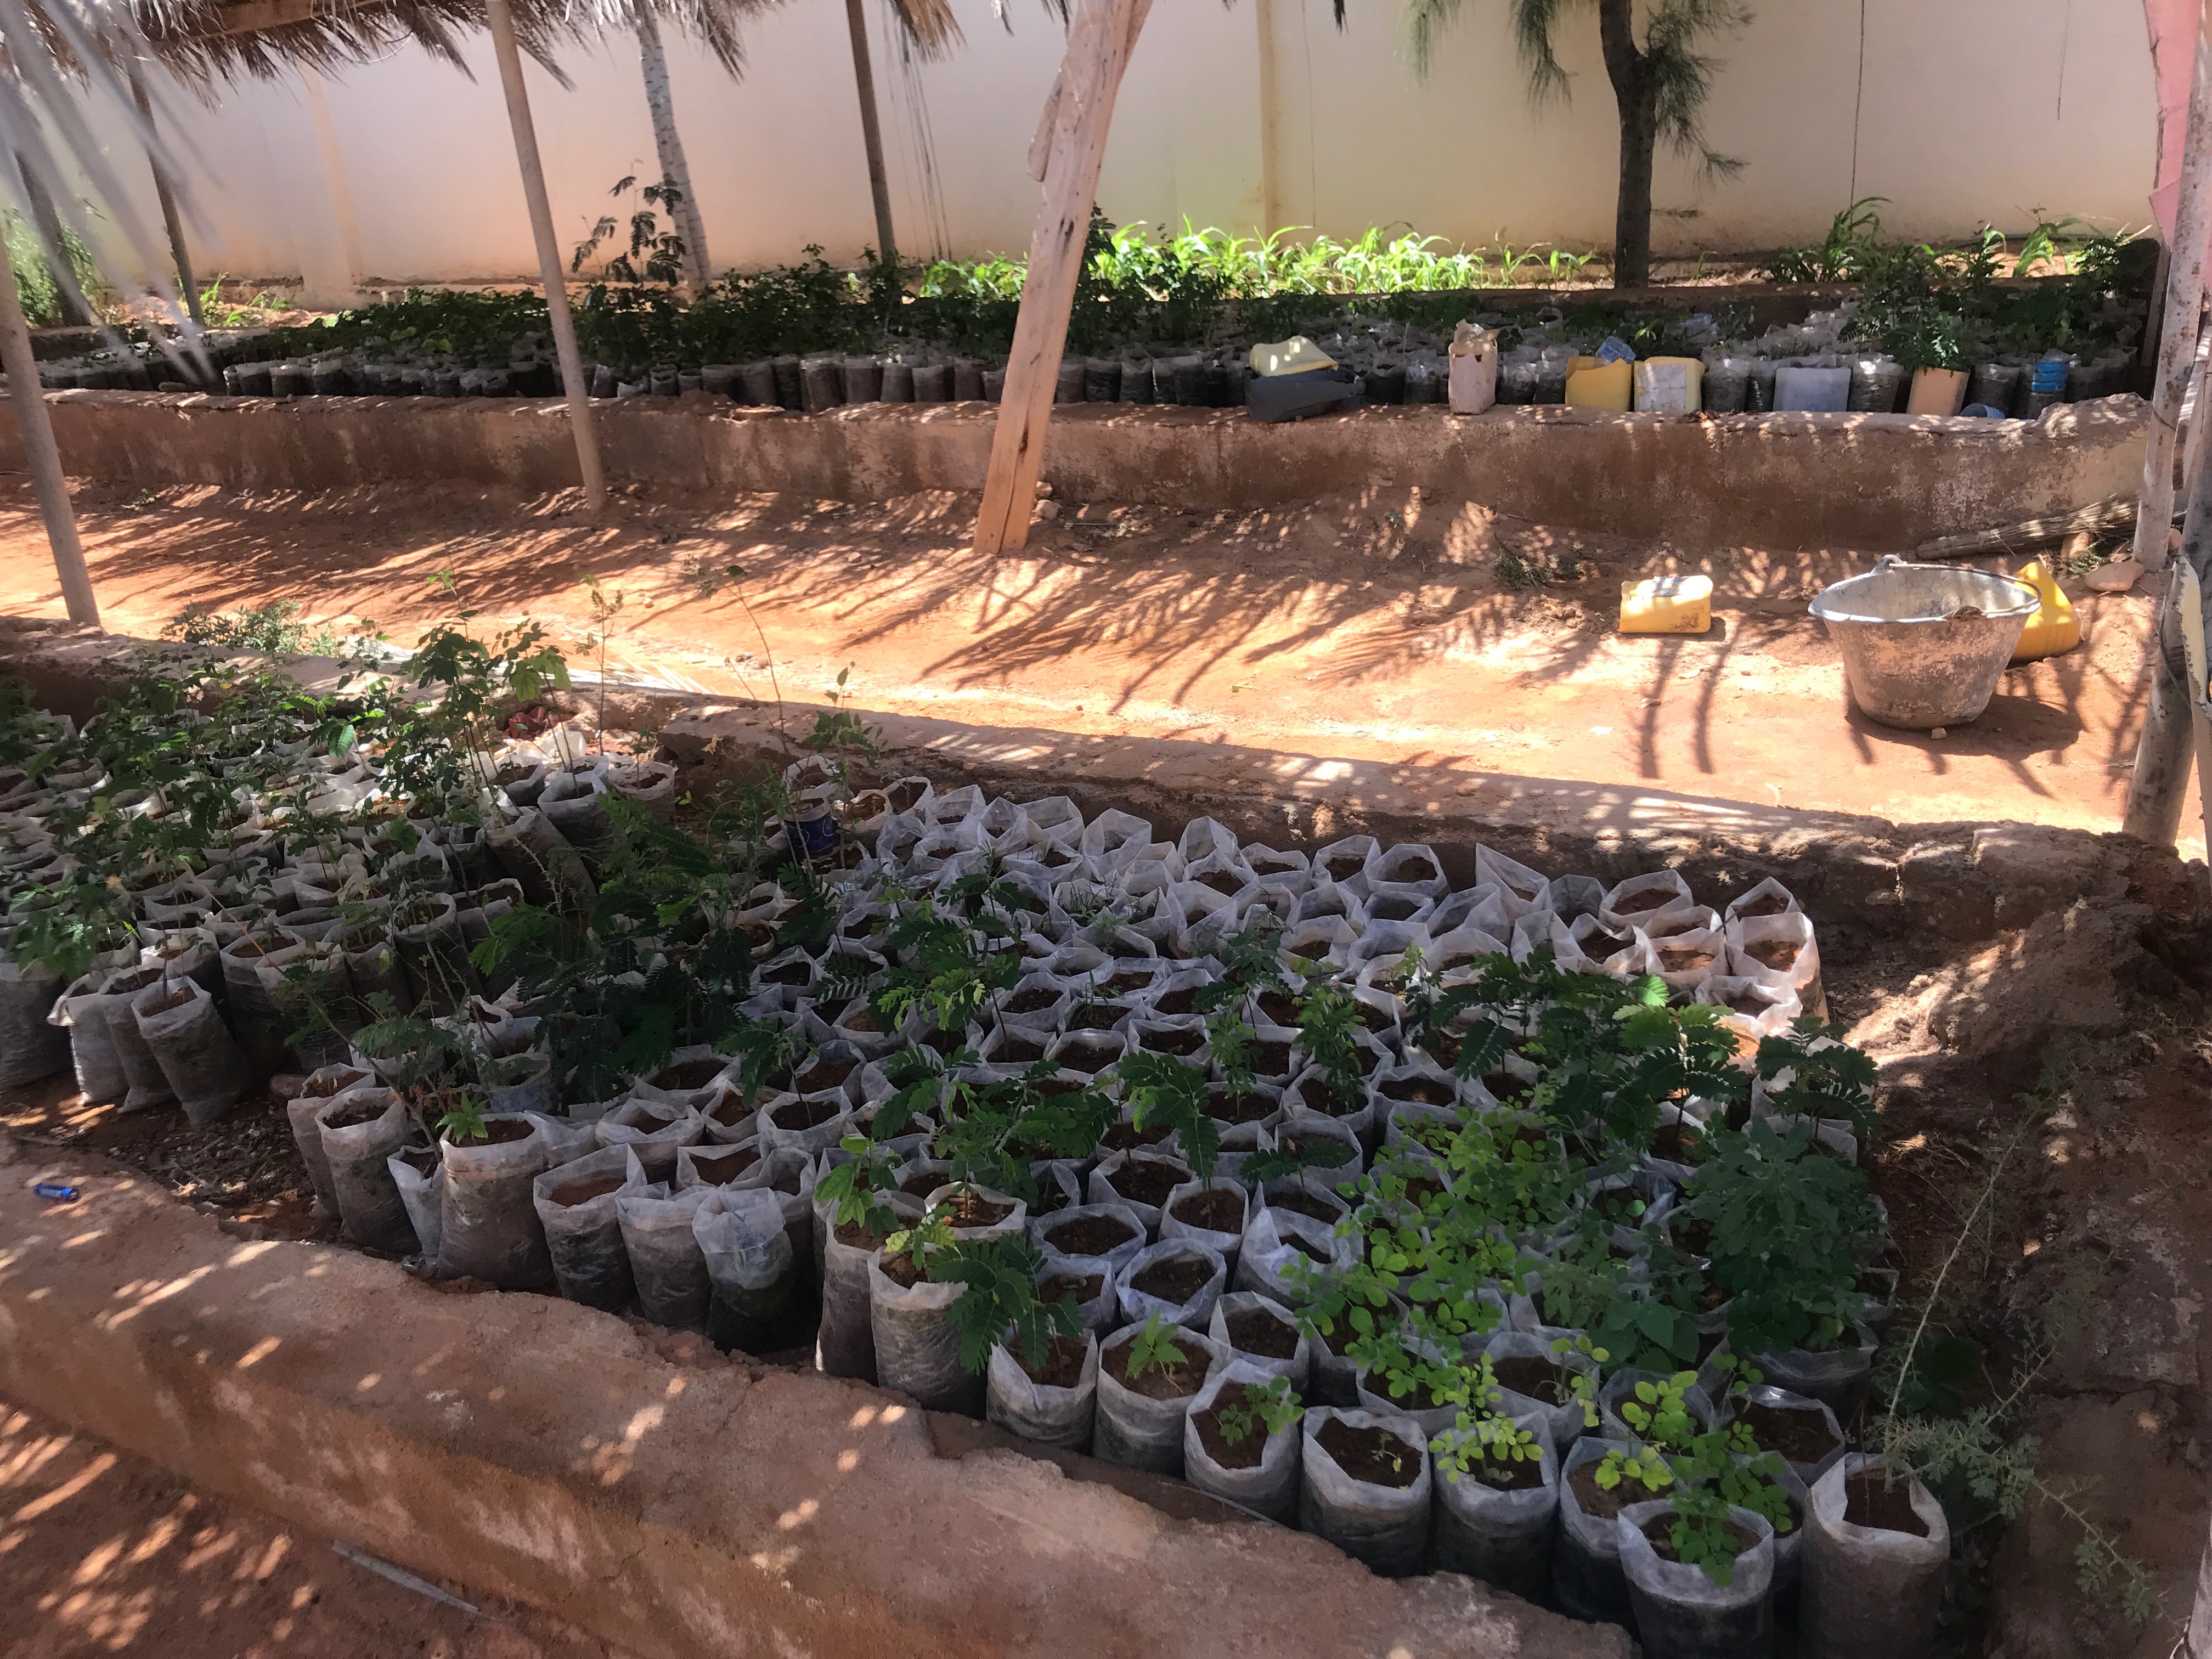 Tree%20nursery%20at%20Minisitry%20of%20Environment%2C%20Agriculture%20and%20CLimate%20Change%20offices%20in%20Garowe%2C%20Puntland.%20Photo%20Jonathan%20Muriuki.jpg